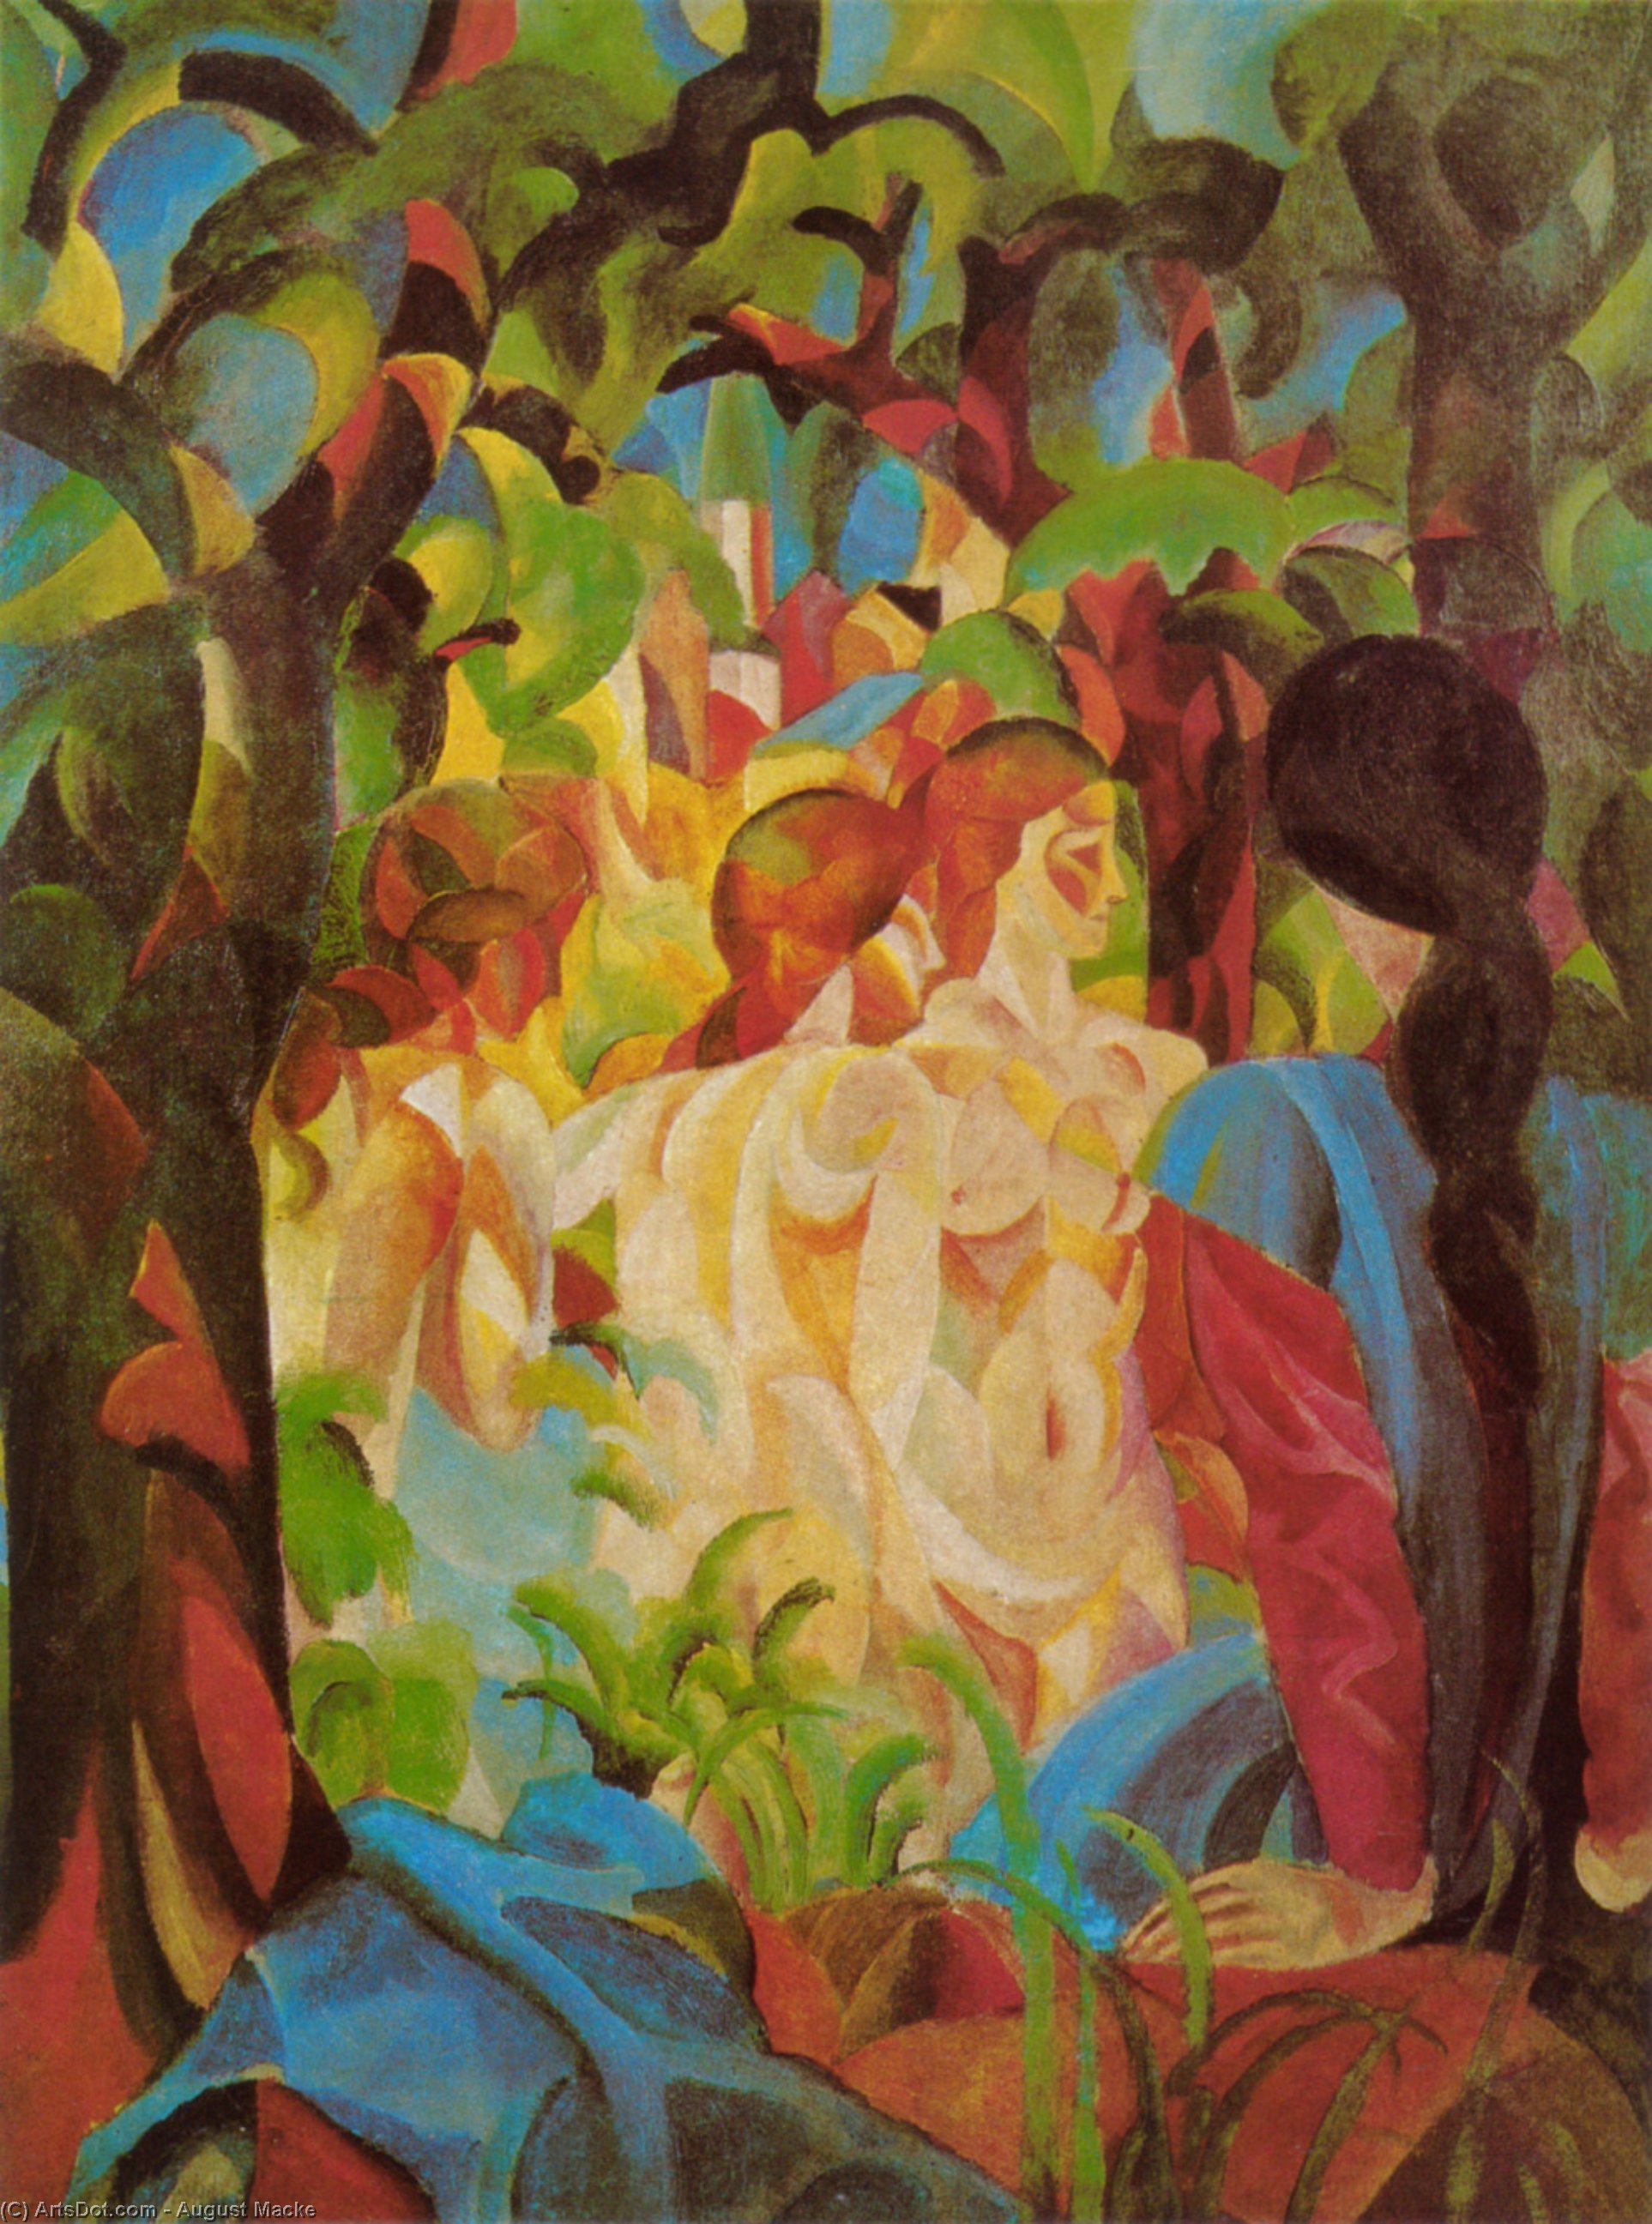 WikiOO.org - Encyclopedia of Fine Arts - Malba, Artwork August Macke - Girls Bathing with Town in Background